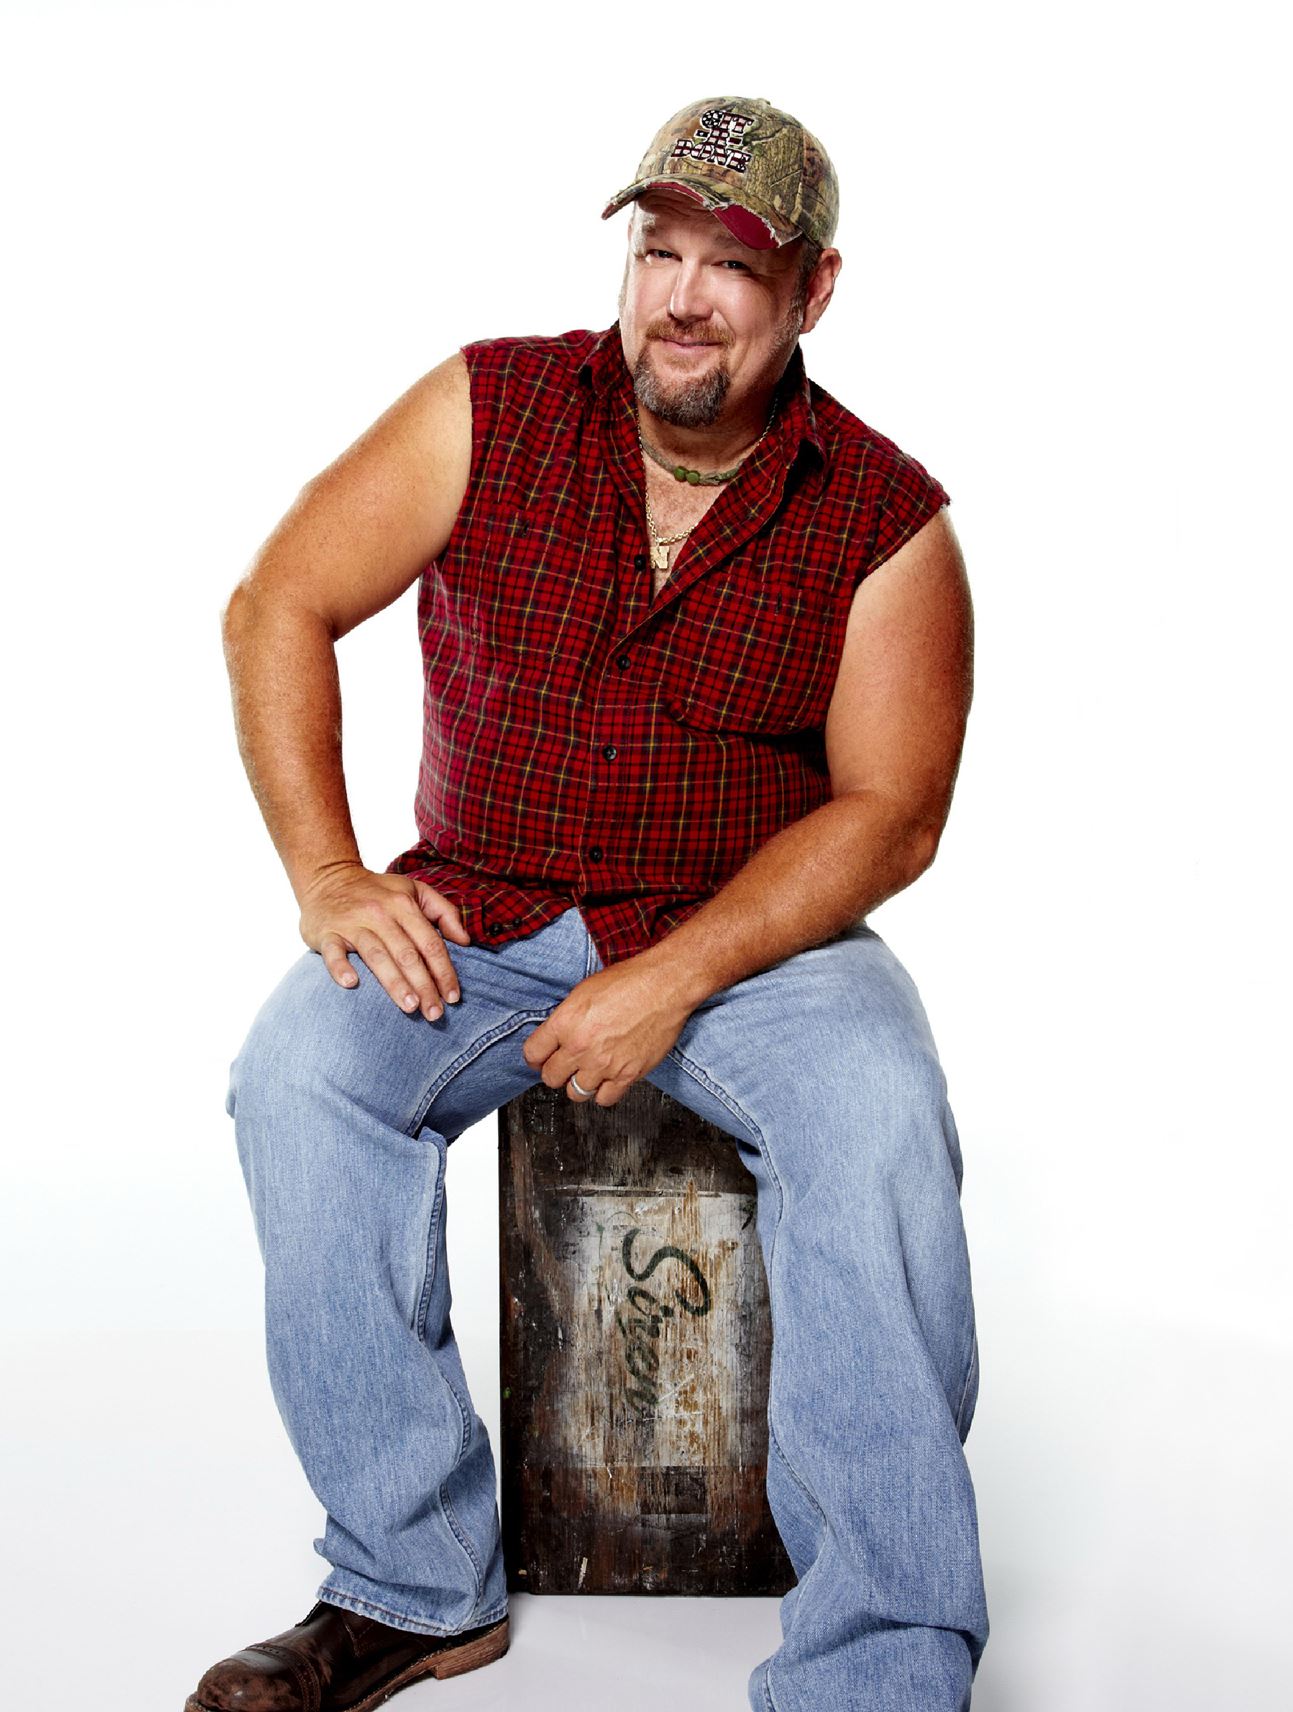 larry-the-cable-guy-images